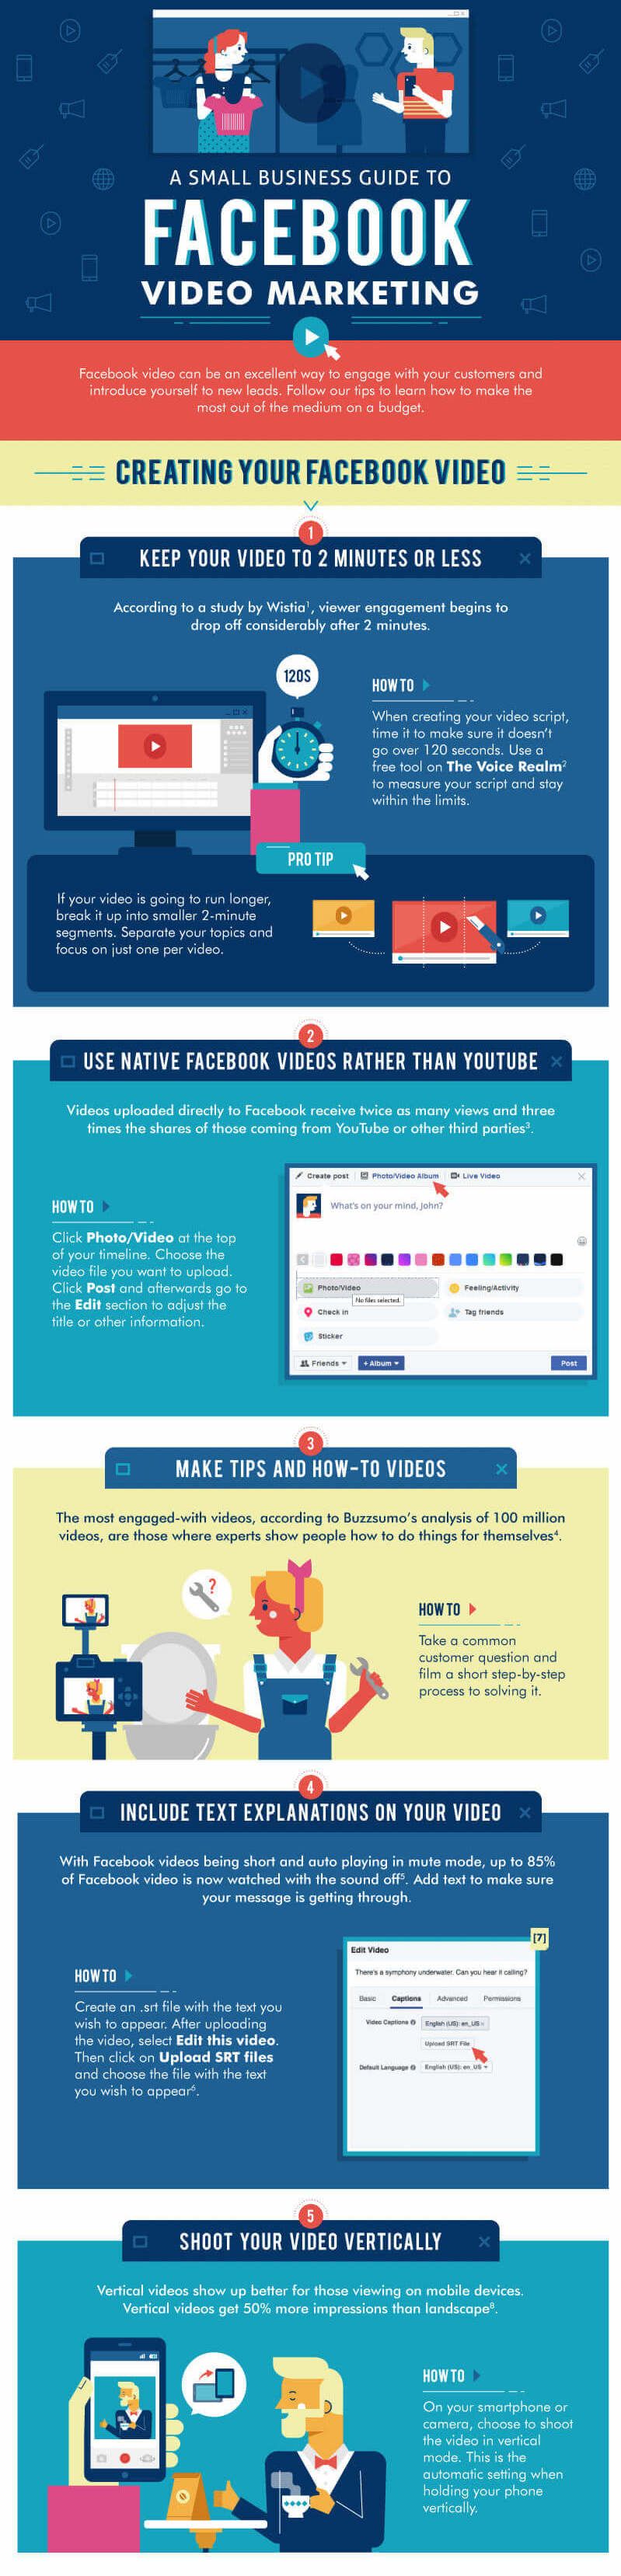 Design a small business guide to facebook video marketing 1 copy